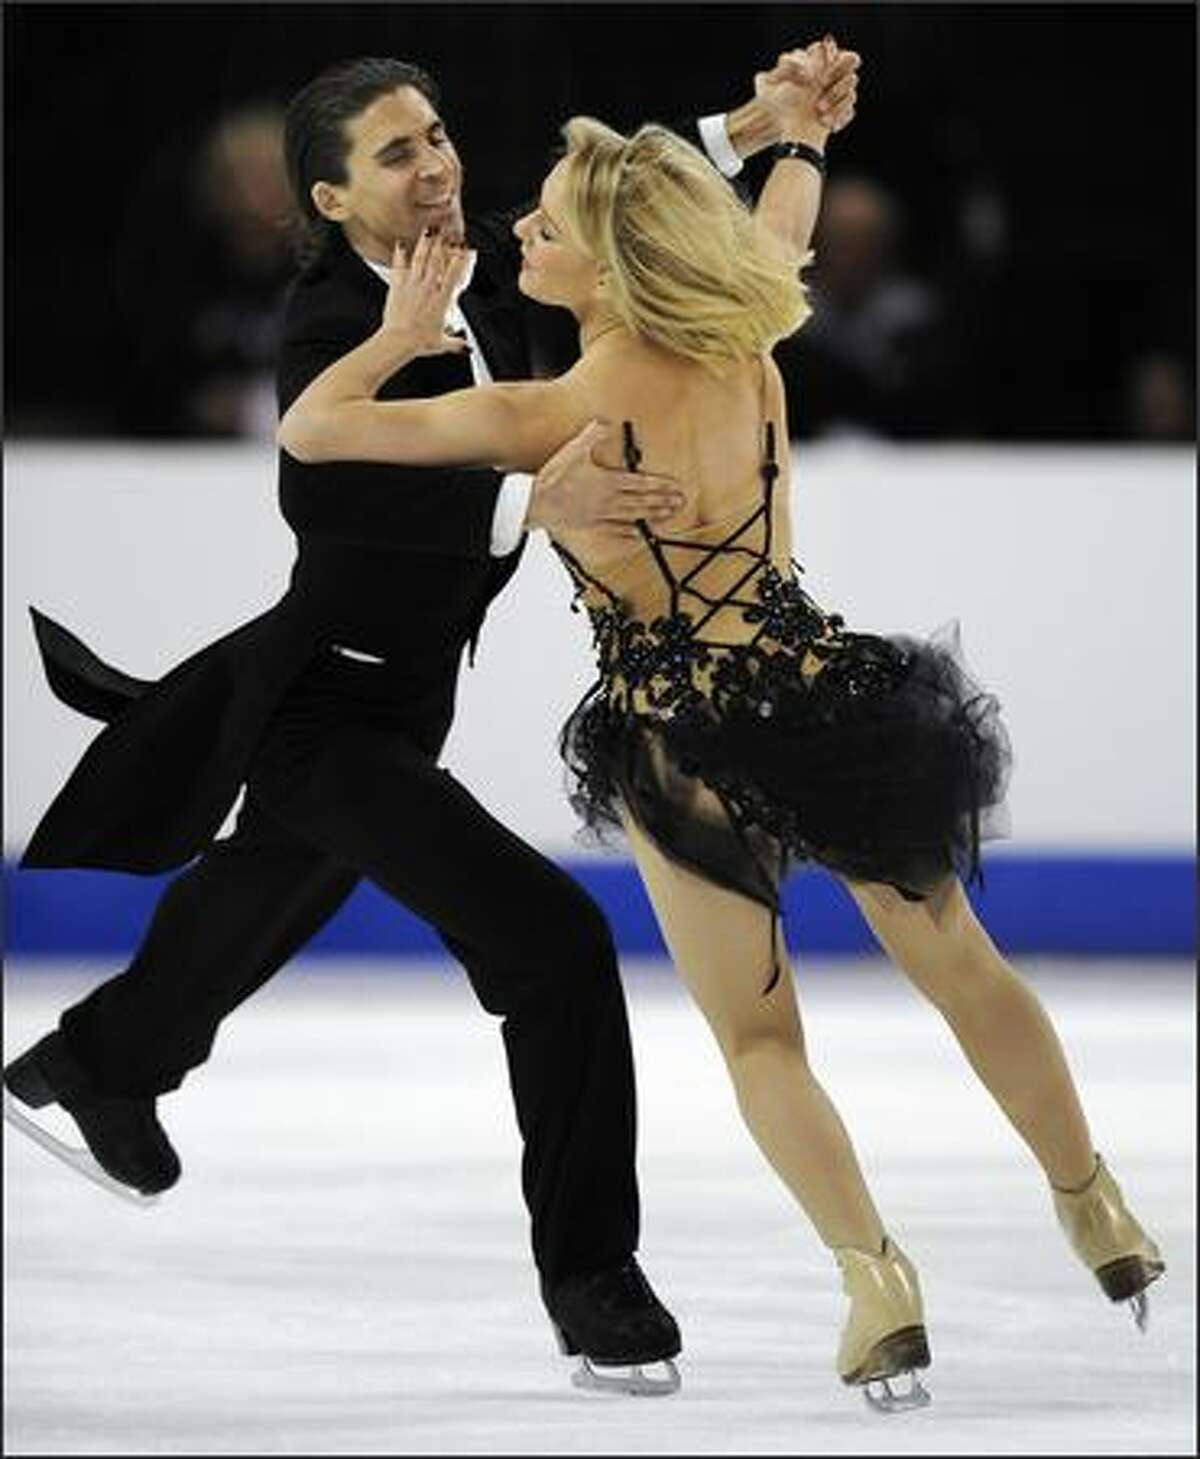 Pernelle Carron and Mathieu Jost of France compete in the Ice Dance Compulsory Competition.